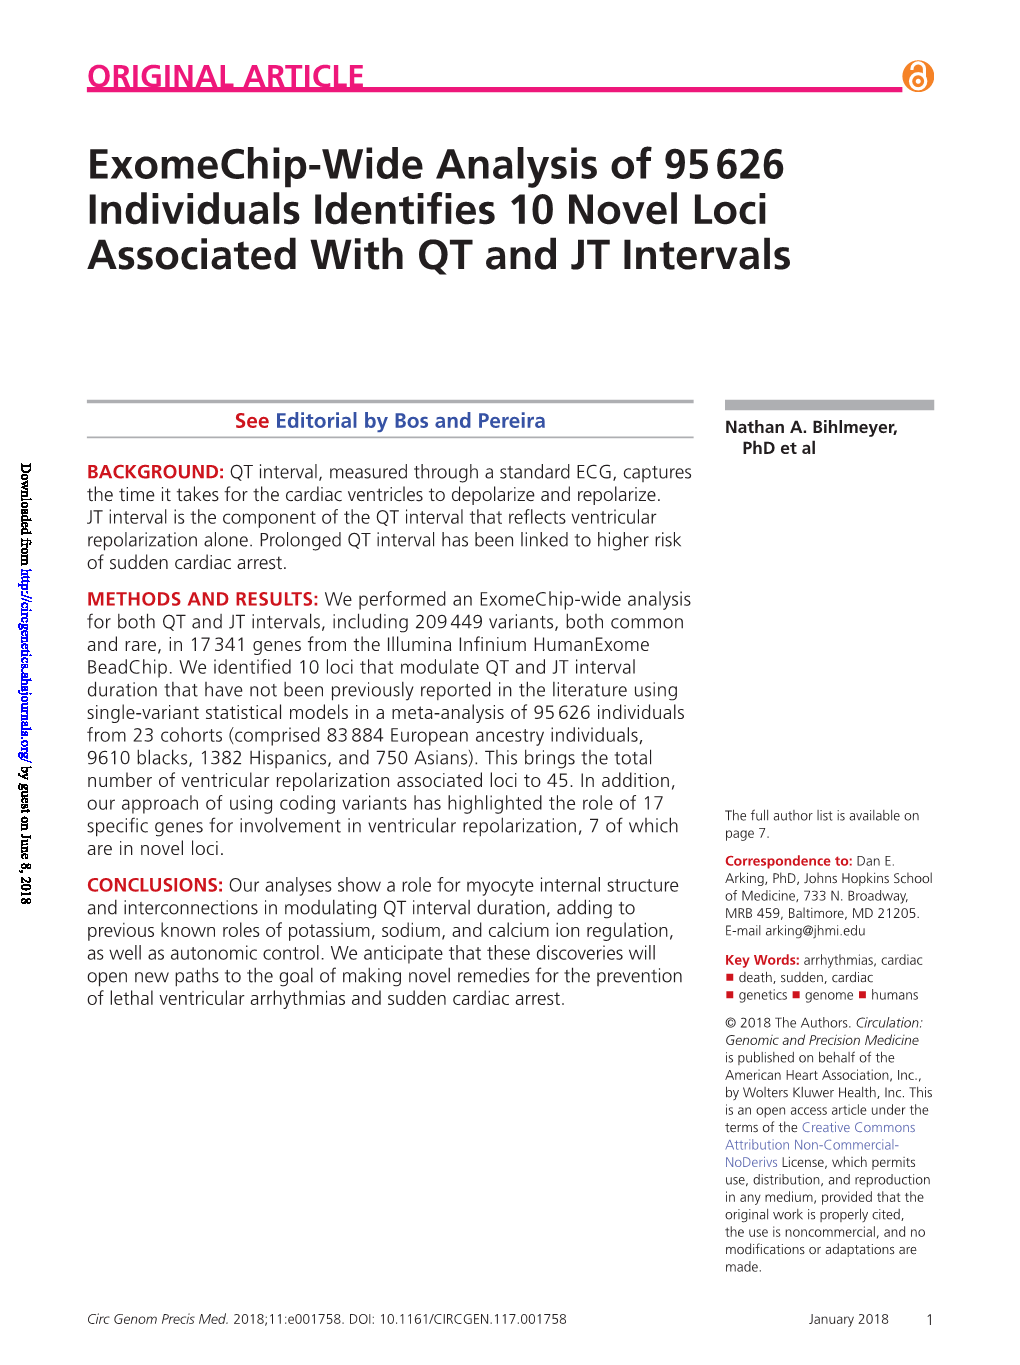 Exomechip-Wide Analysis of 95 626 Individuals Identifies 10 Novel Loci Associated with QT and JT Intervals